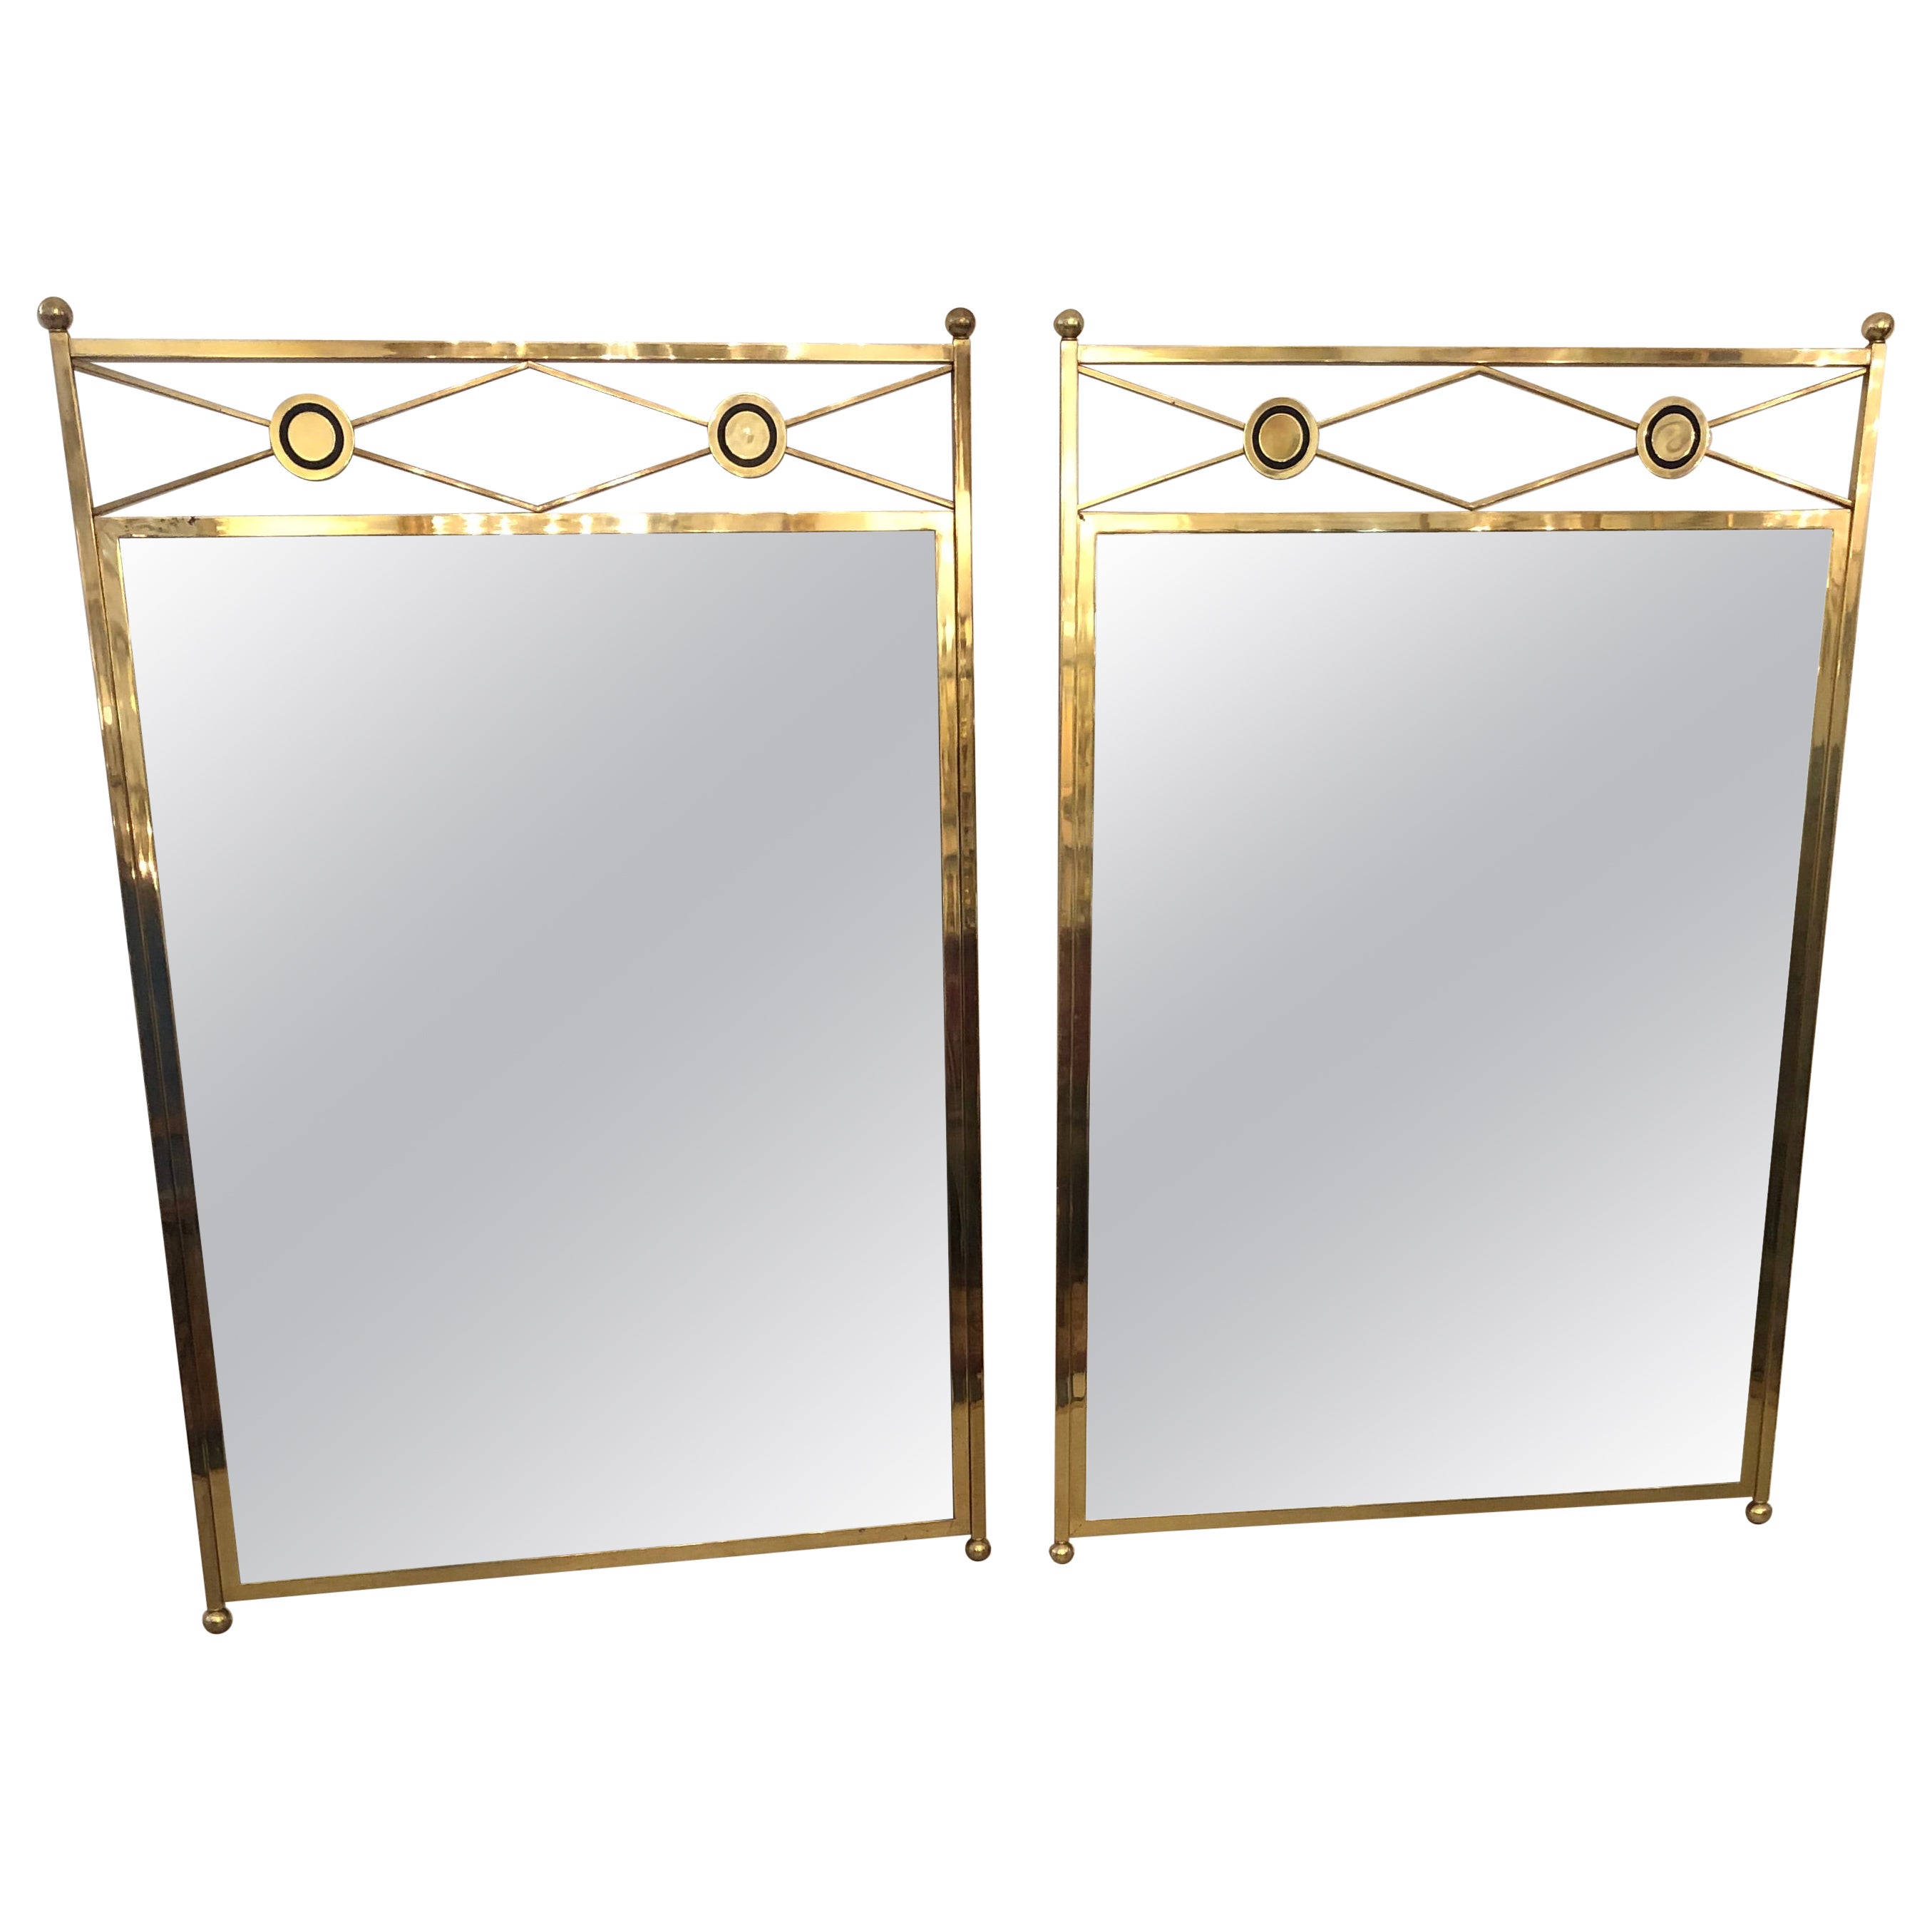 Sensational Pair of Large Solid Brass Hollywood Regency Vintage Mirrors For Sale